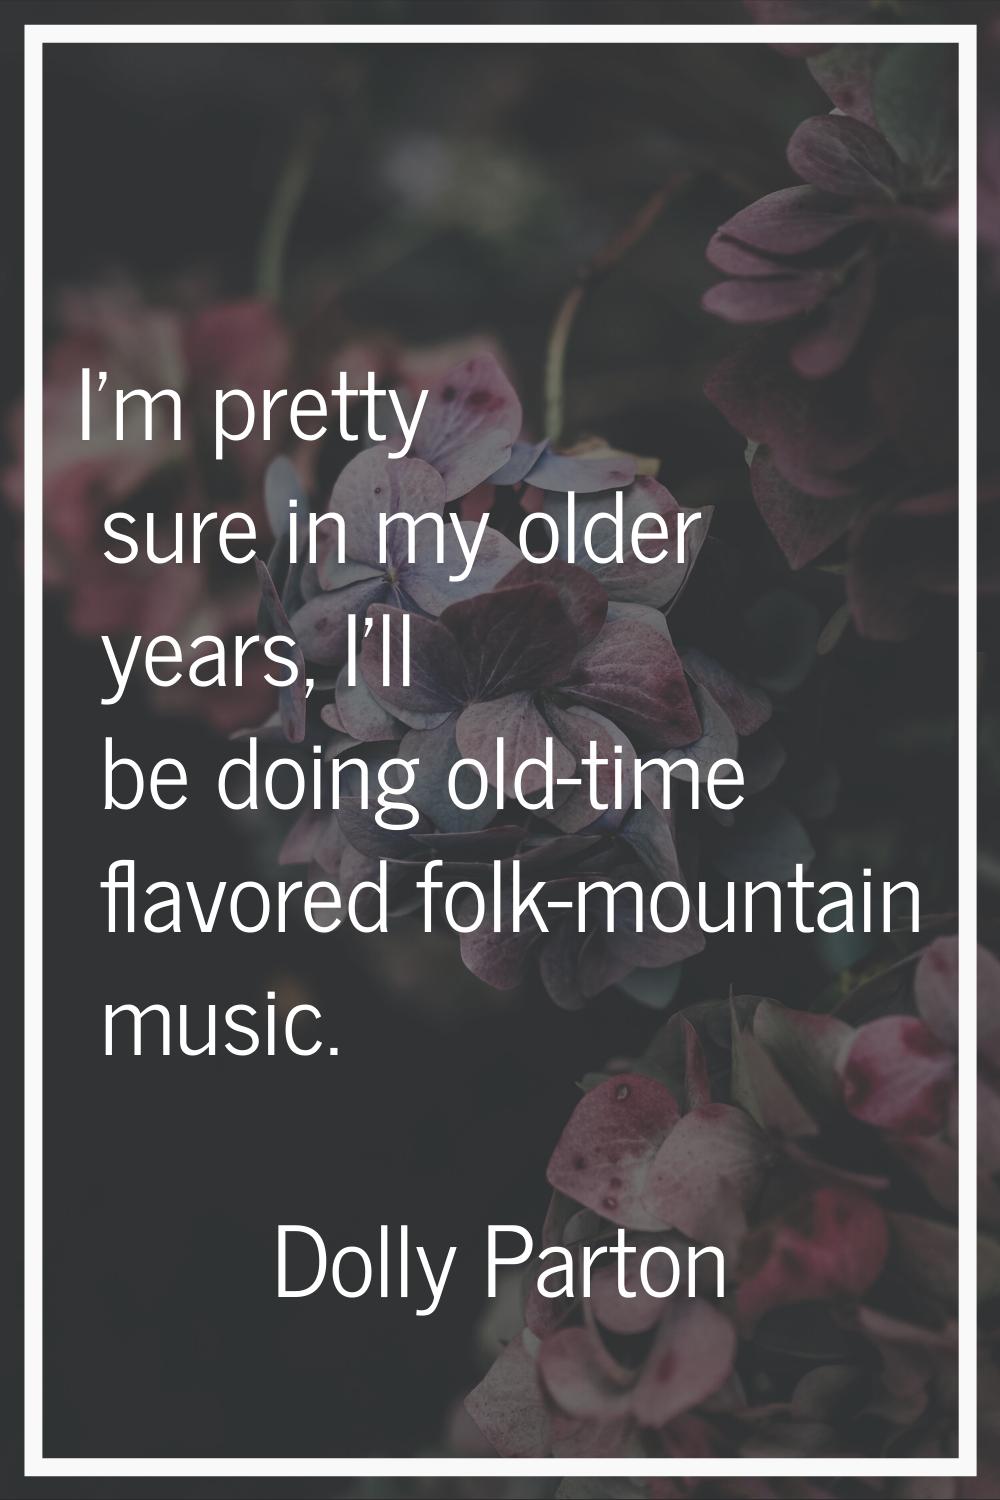 I'm pretty sure in my older years, I'll be doing old-time flavored folk-mountain music.